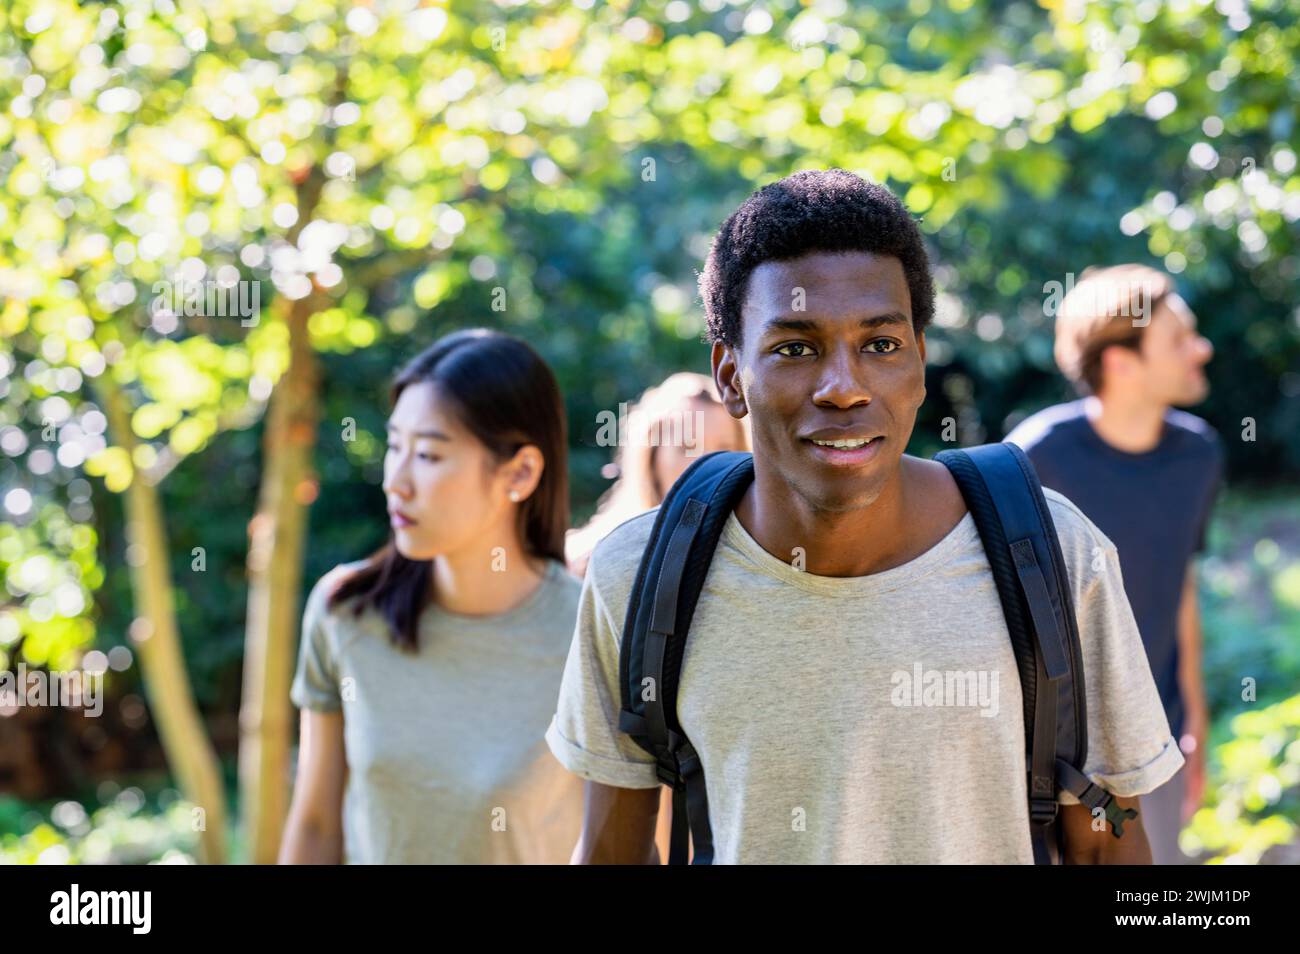 Young adult man wearing backpack during hiking with friends Stock Photo